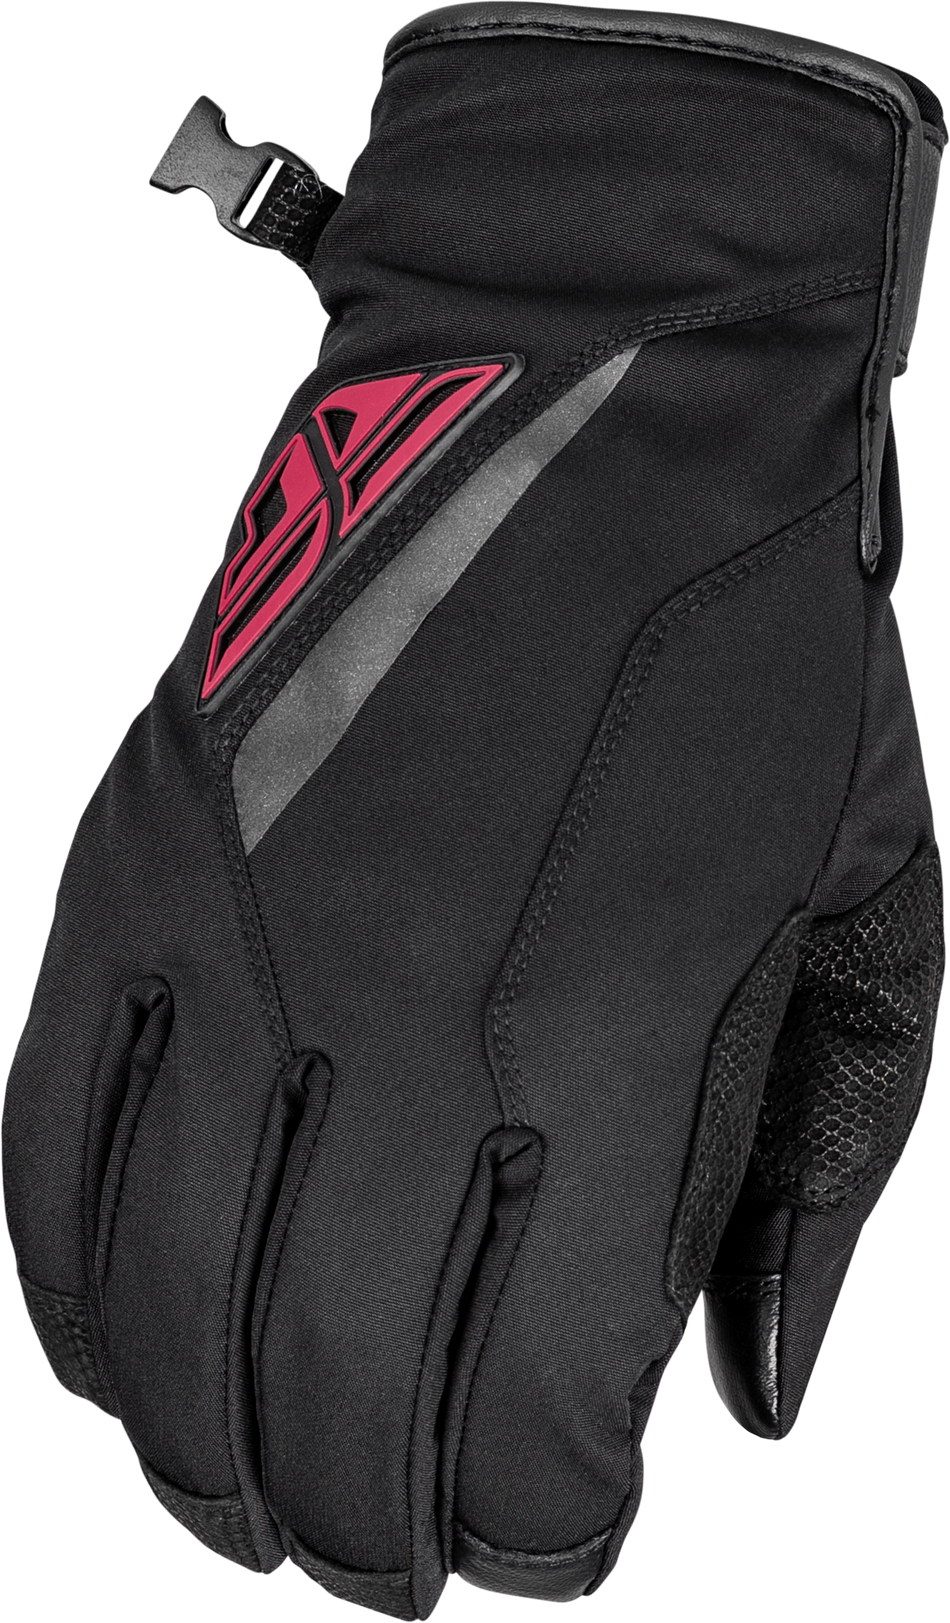 FLY RACING Title Long Gloves Black/Pink Xl 371-0614X